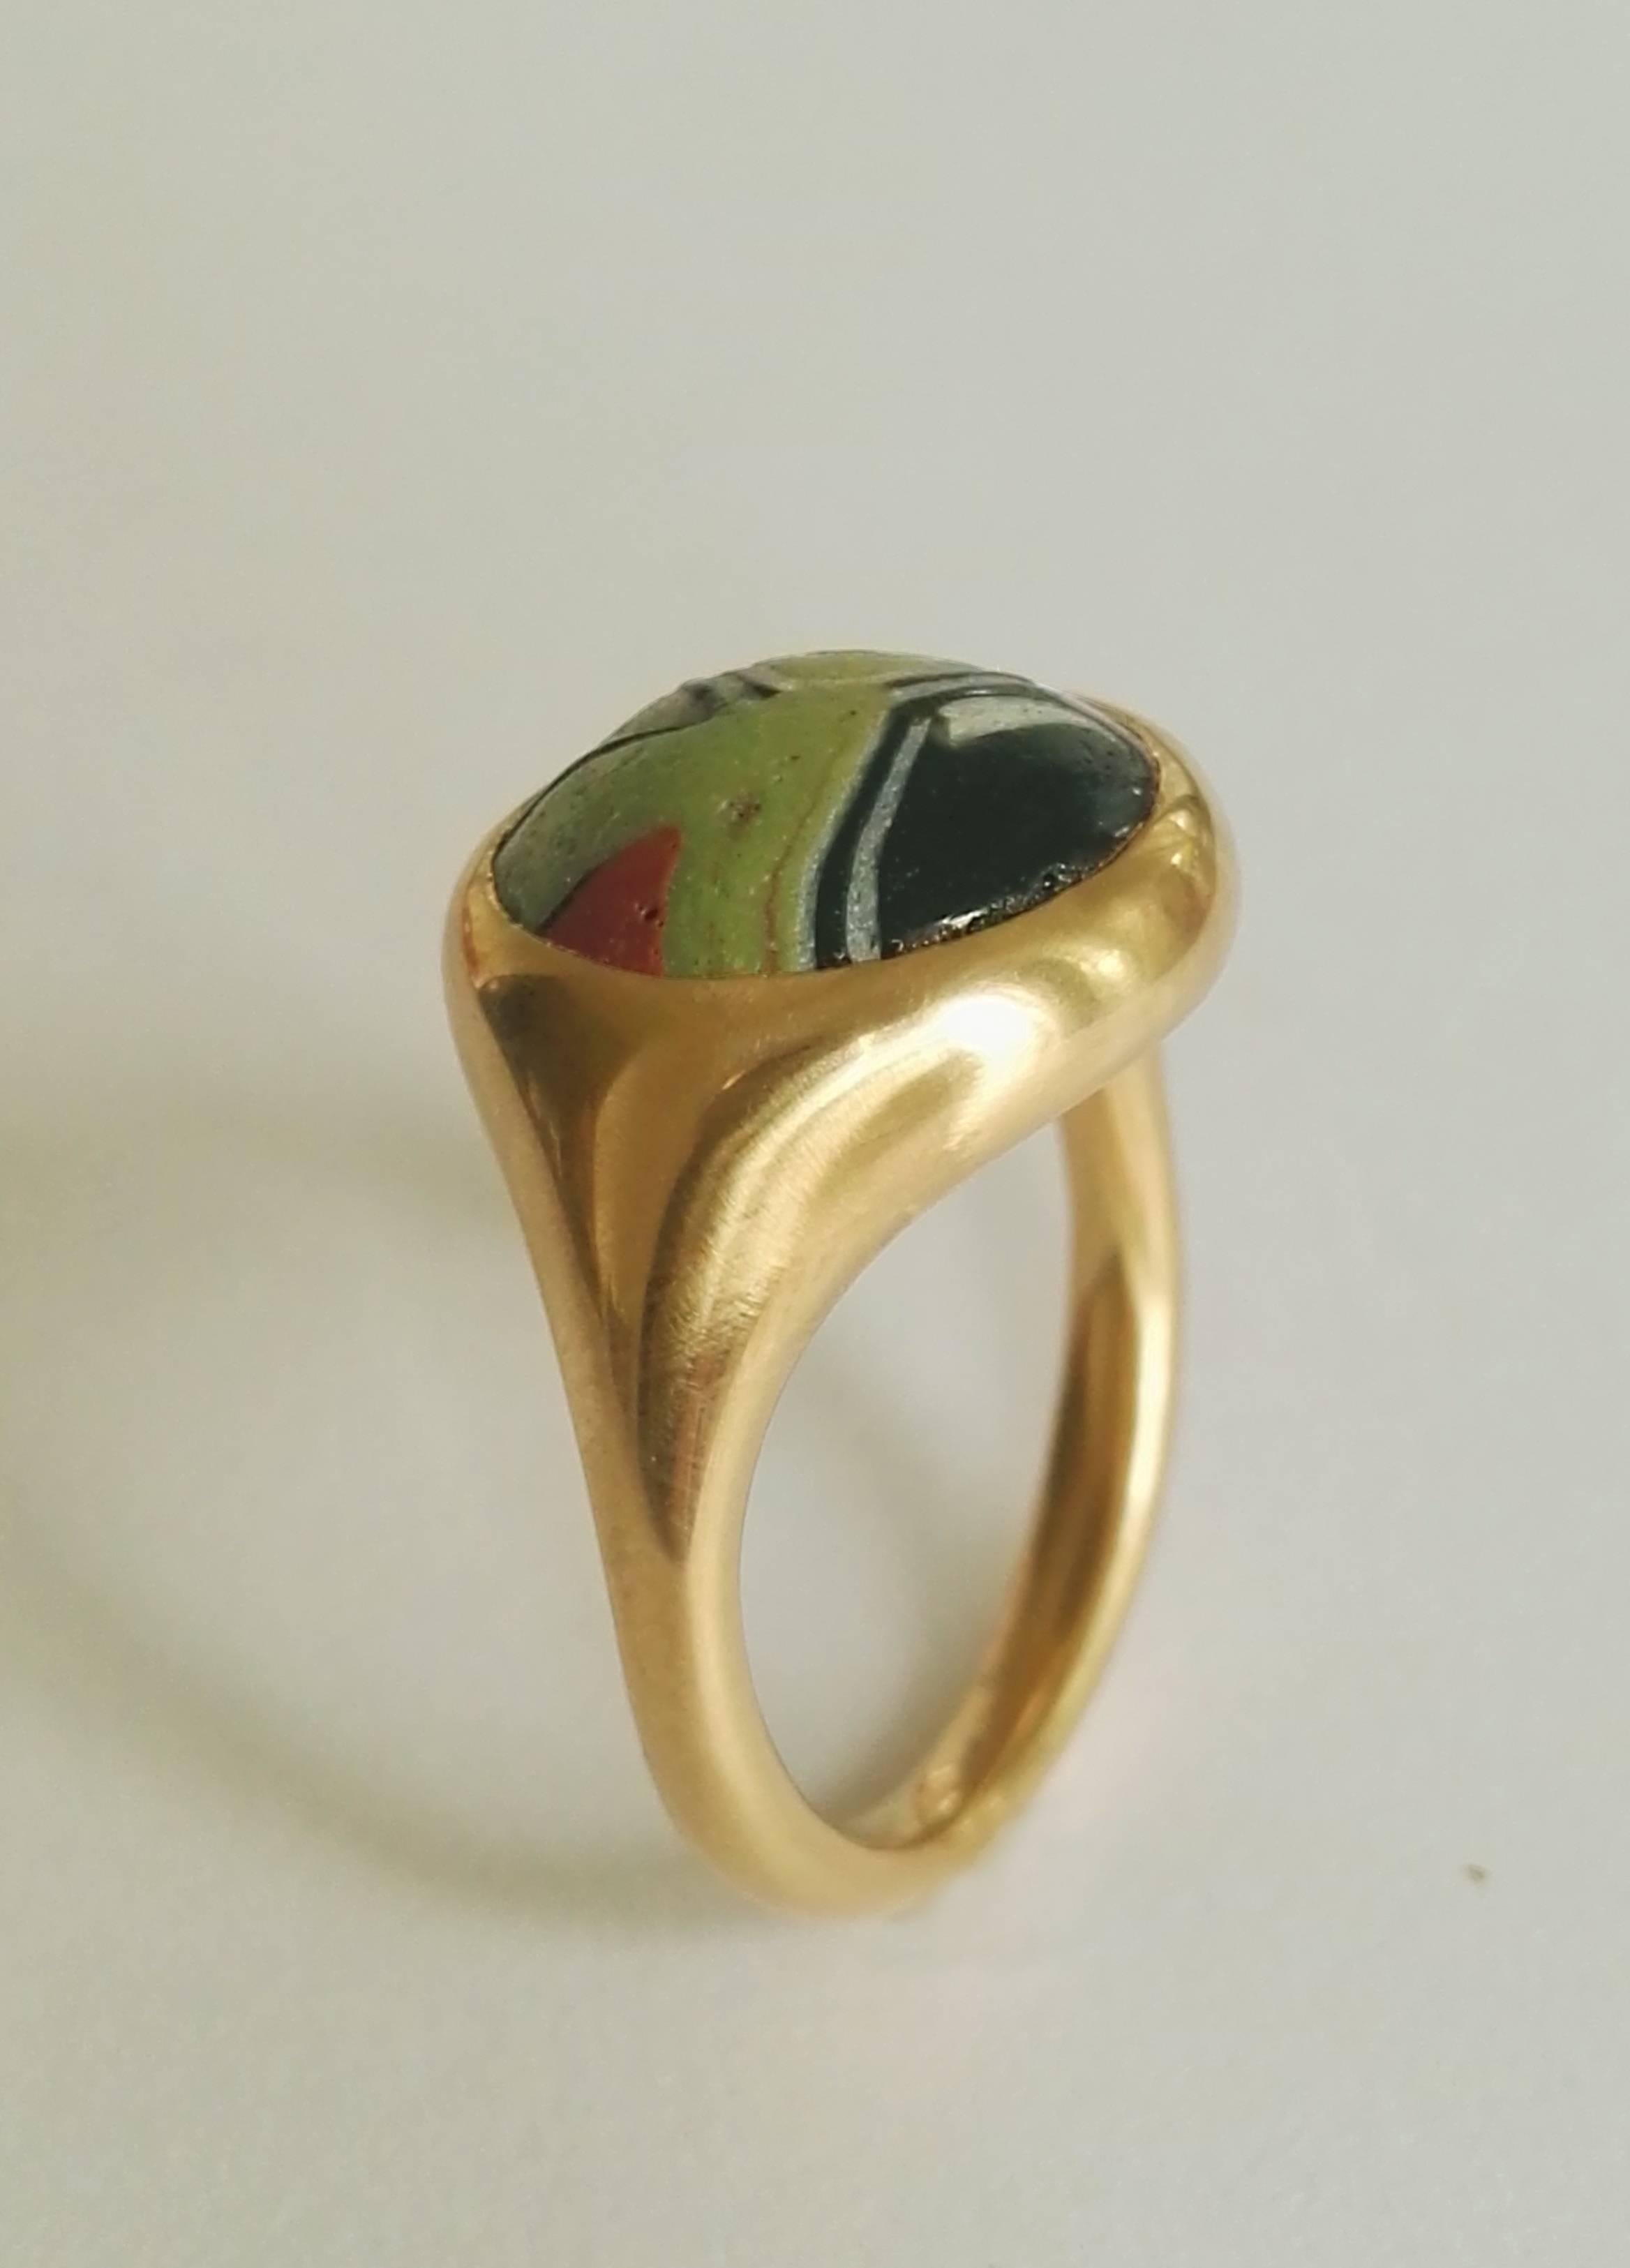 Dalben design  18k yellow gold ring with a bezel-set multicolor Murrina  size 7 USA - 54 EU re-sizable to most finger sizes. The Ring has been designed and handcrafted in our atelier in Italy Como with a rigorous quality workmanship .